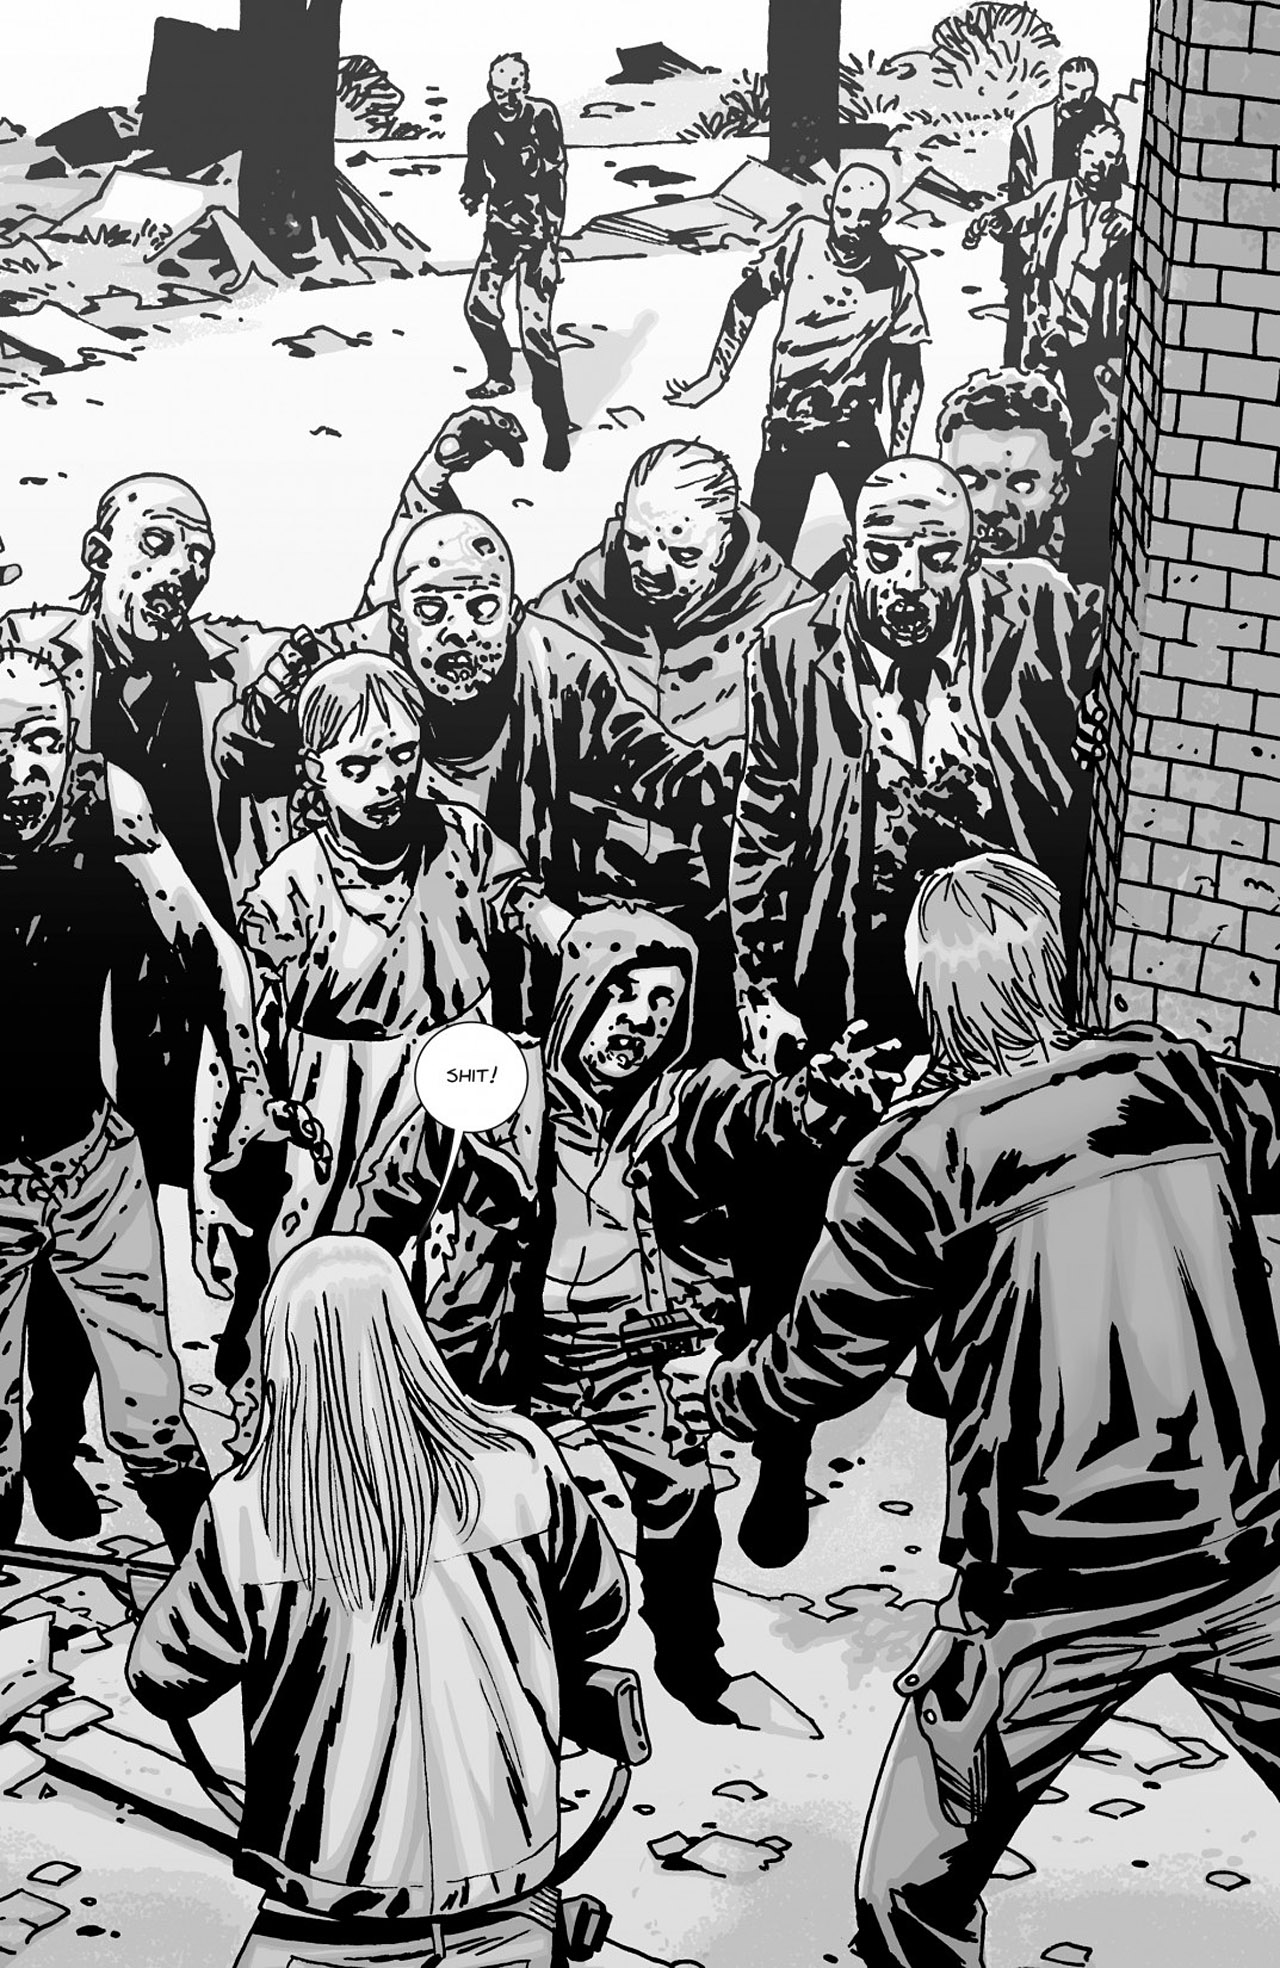 THE WALKING DEAD 98 - SOMETHING TO FEAR, Part Two